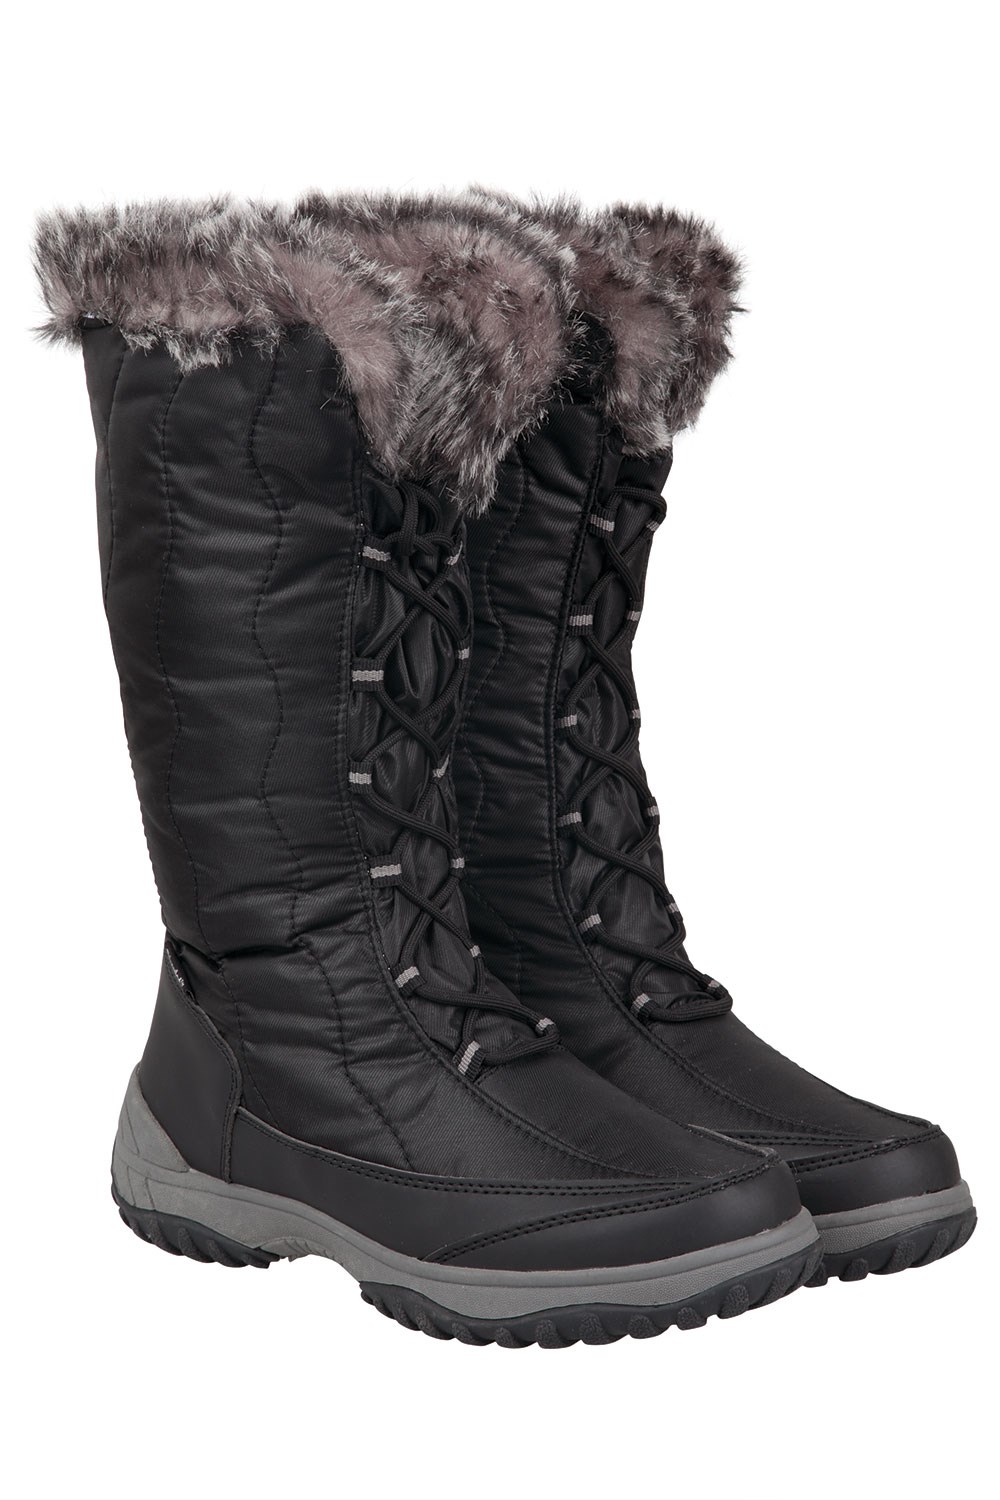 Snowstorm Extreme Womens Snow Boots | Mountain Warehouse US